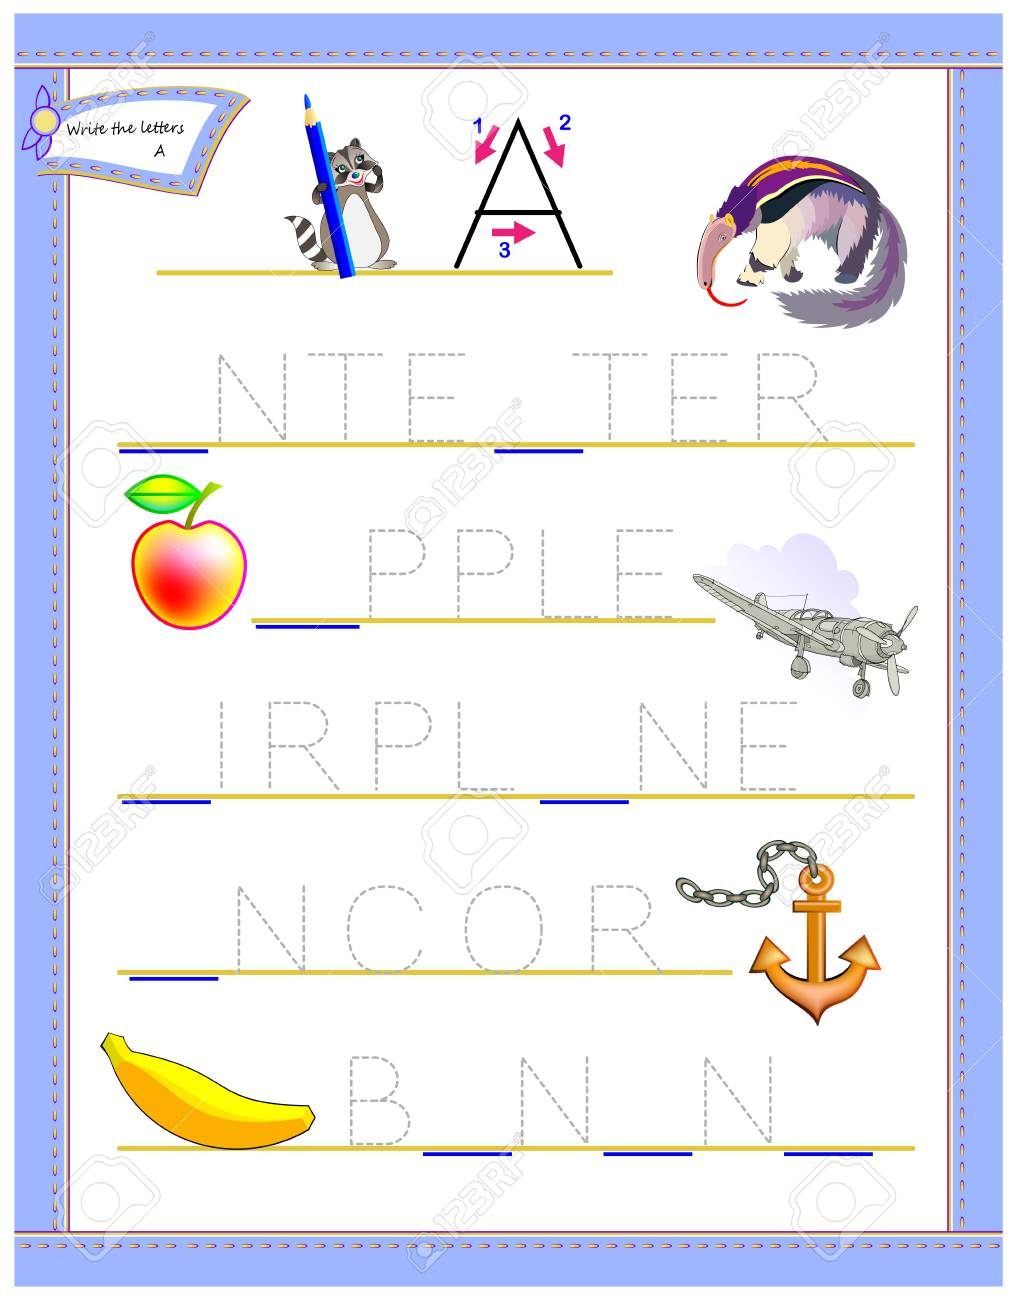 Tracing Letter A For Study English Alphabet. Worksheet For Kids throughout Alphabet Tracing Puzzle